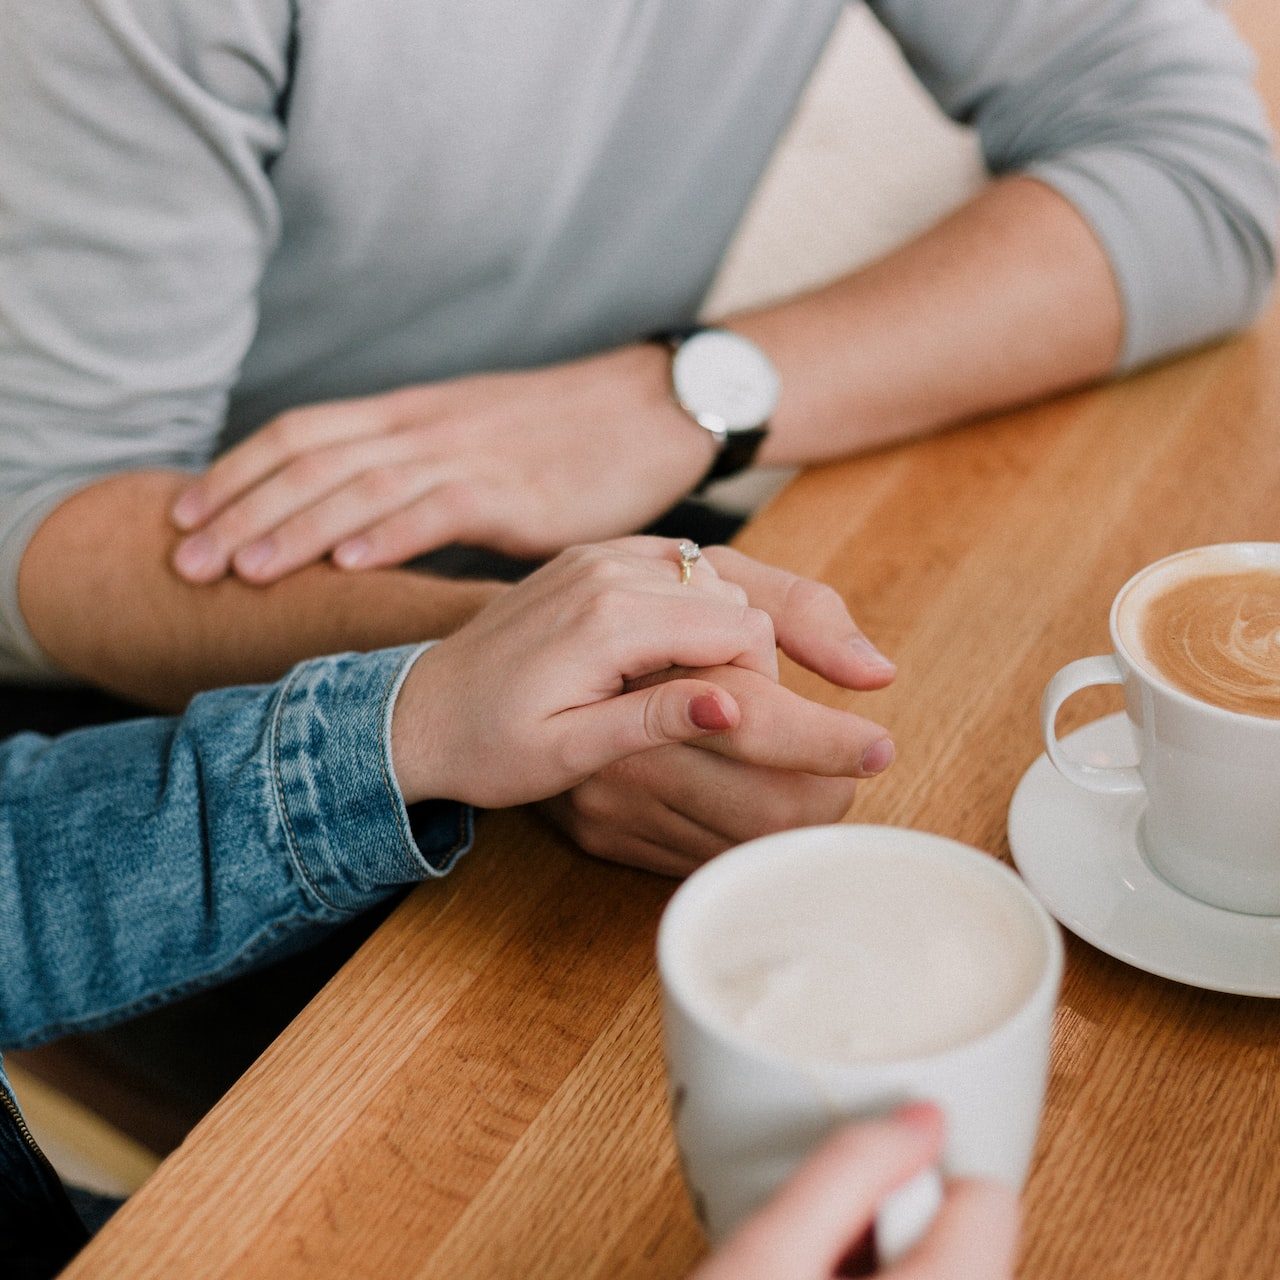 A couple reassuring each other while holding hands and drinking coffee.